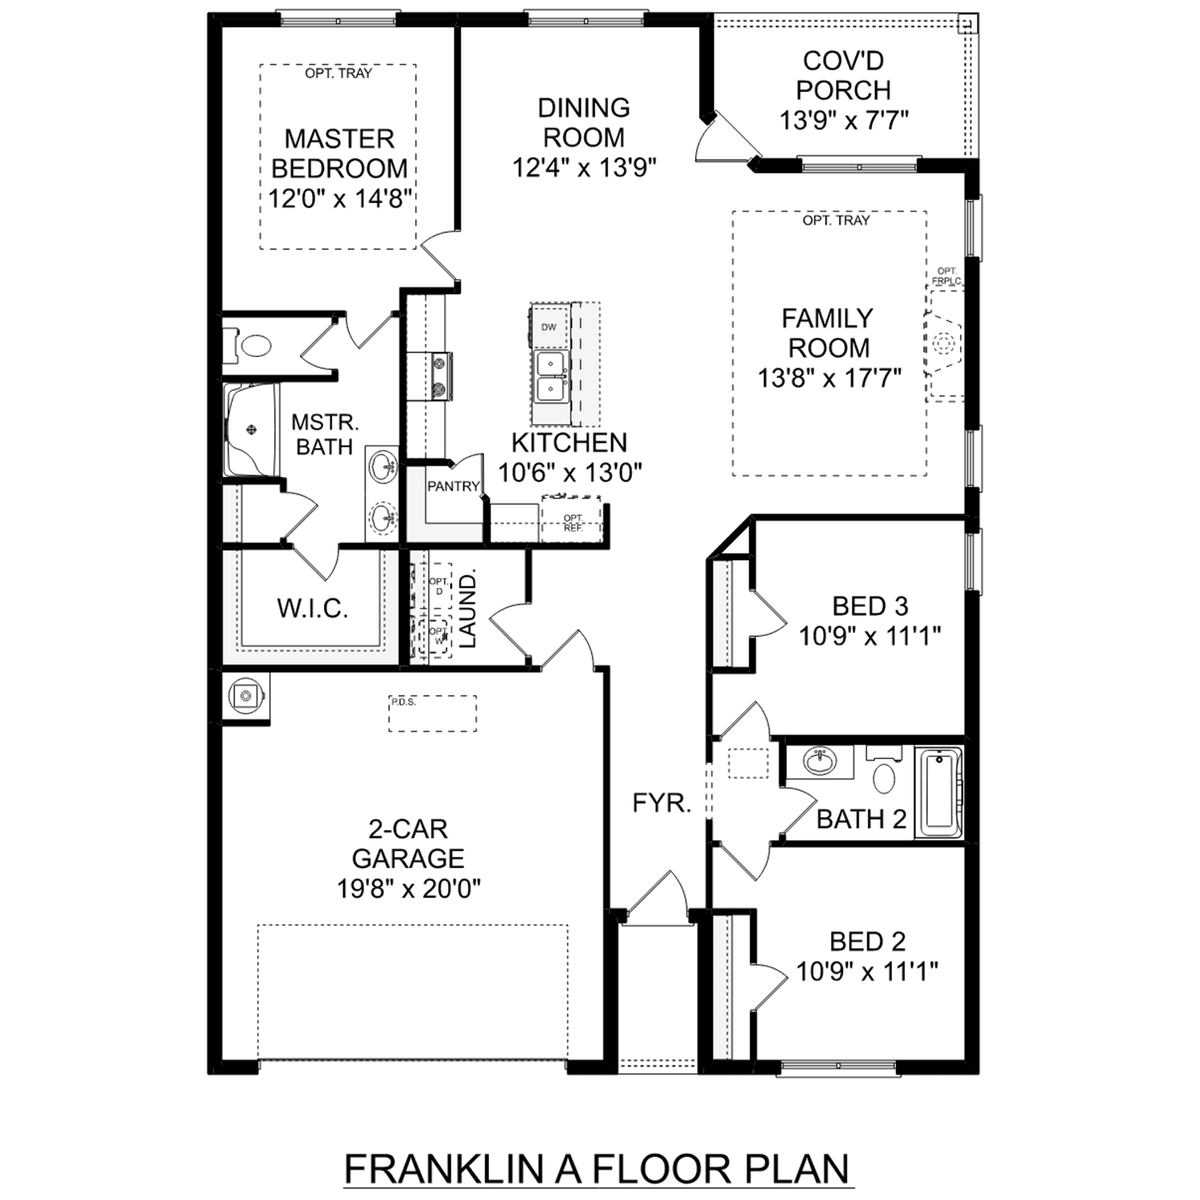 1 - The Franklin floor plan layout for 3126 Lea Lane in Davidson Homes' Hollon Meadow community.